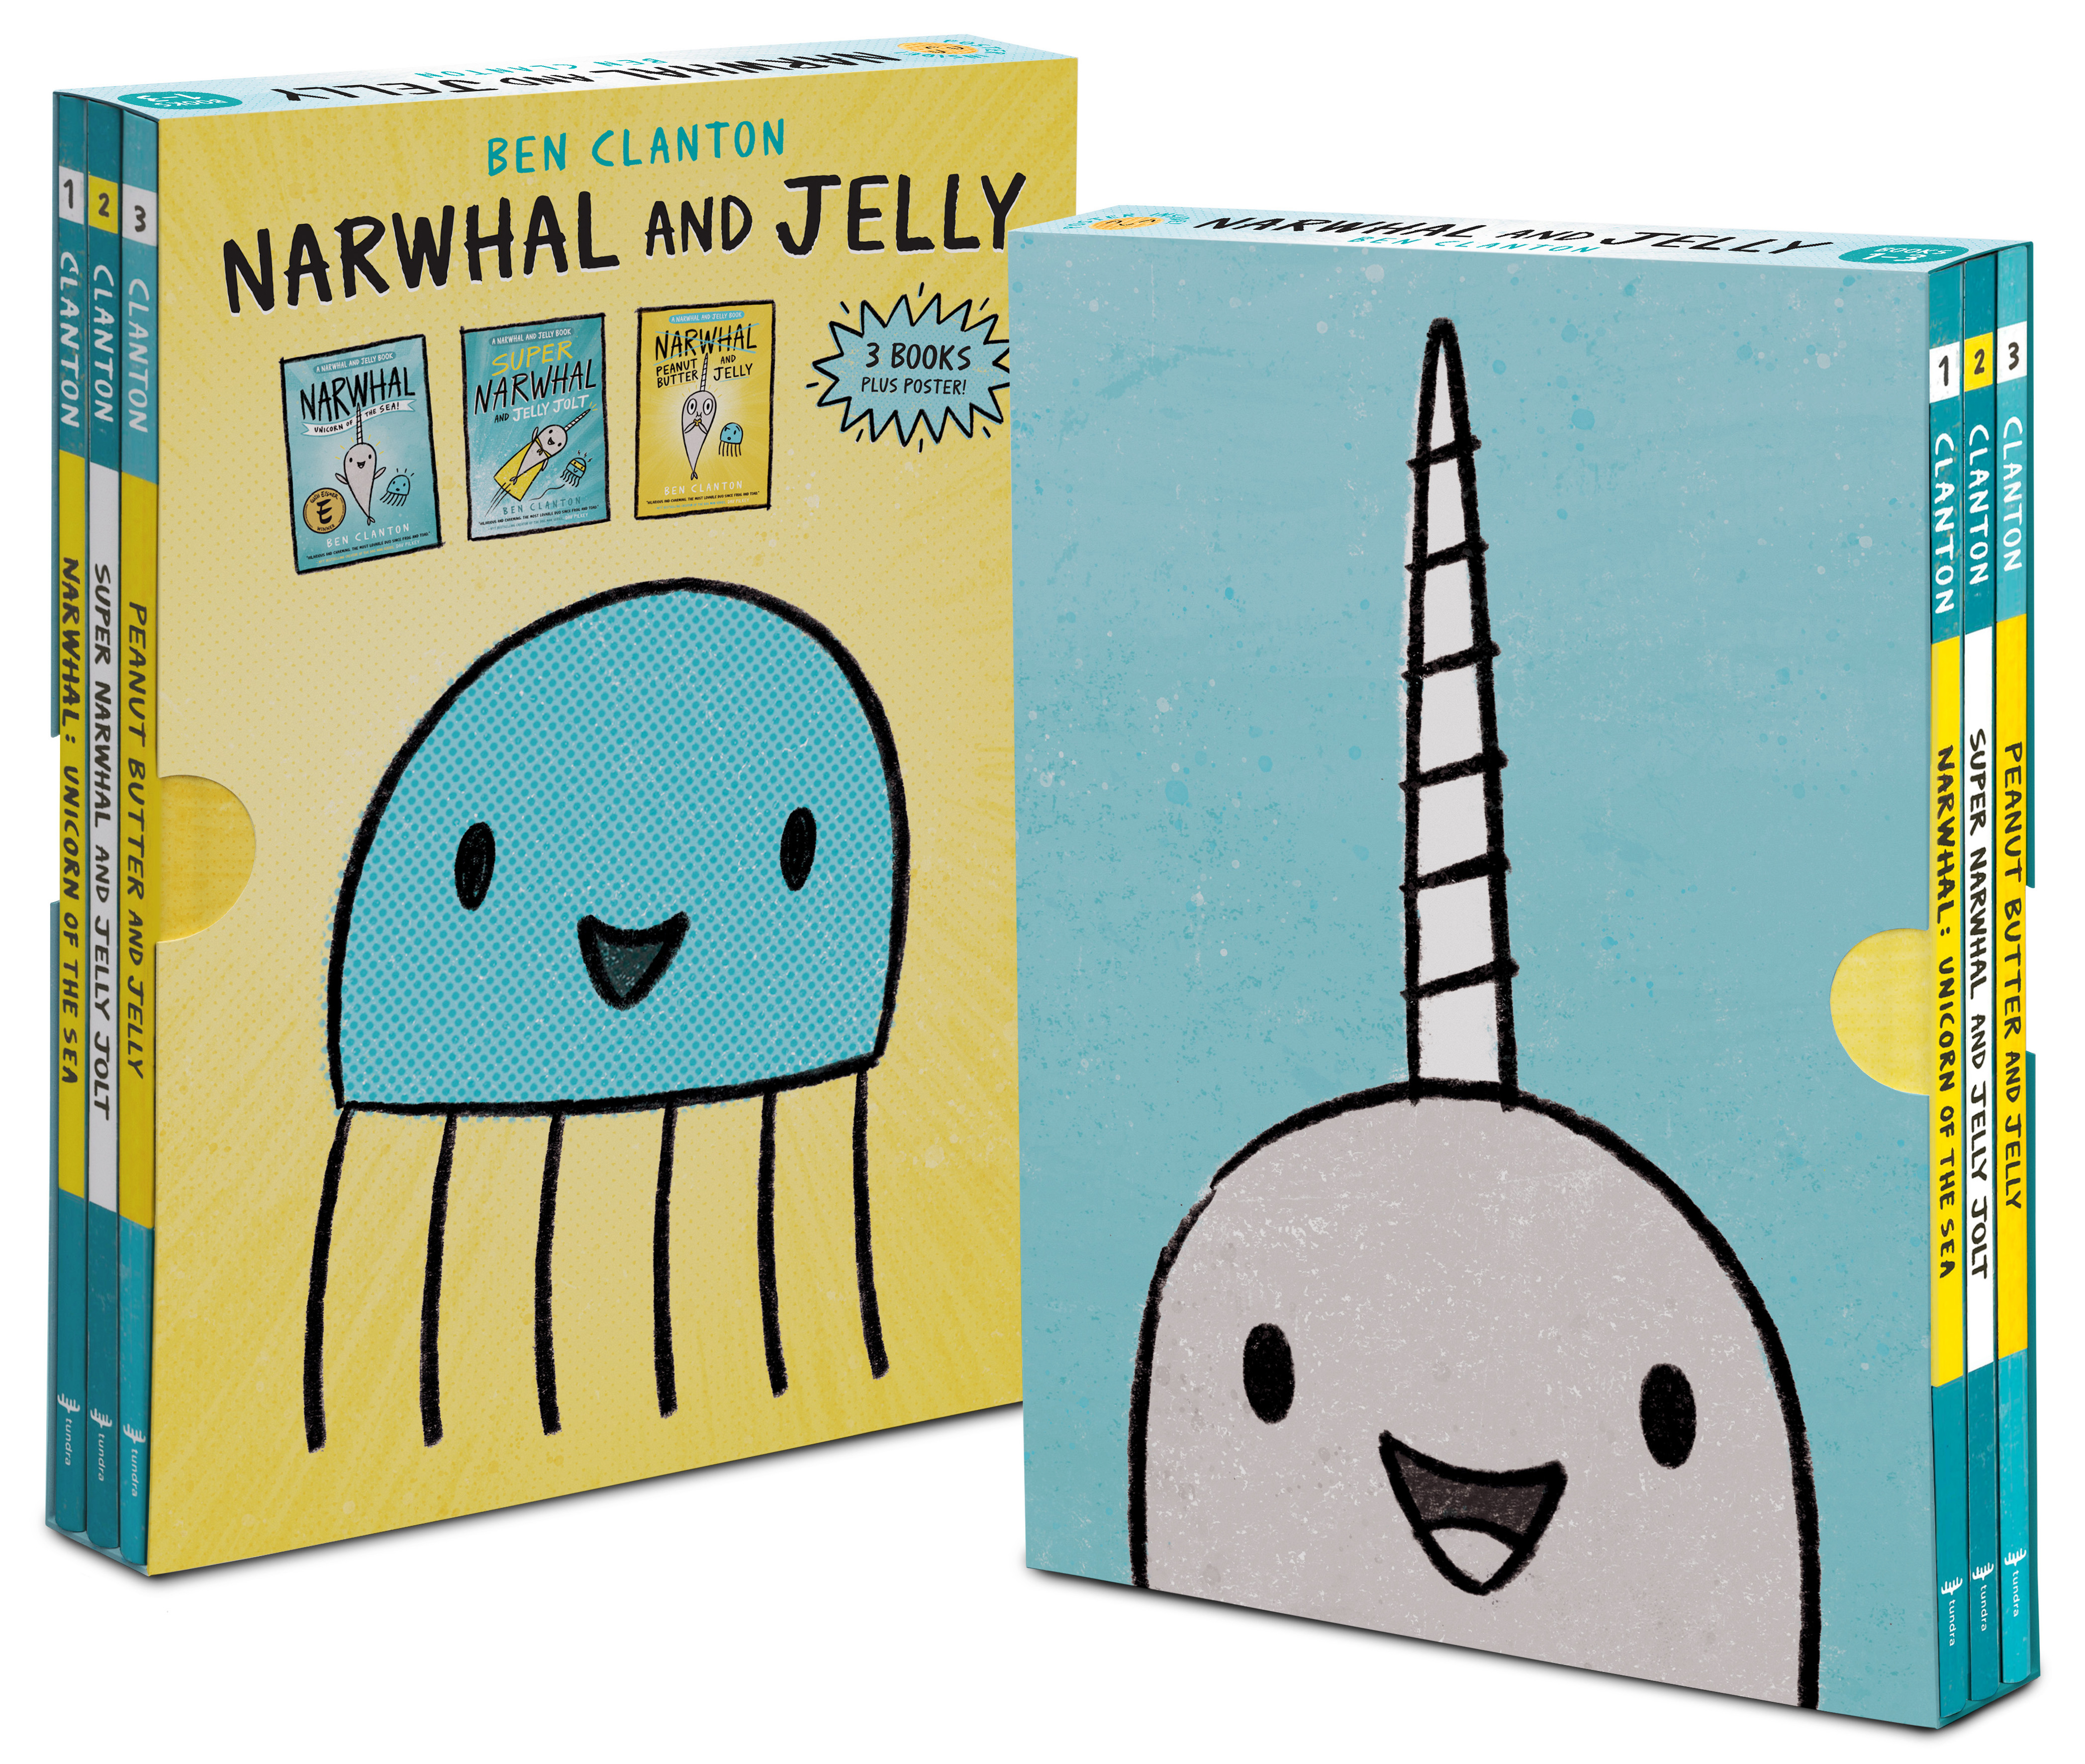 Narwhal and Jelly Box Set (Paperback Books 1, 2, 3, AND Poster) | Clanton, Ben (Auteur)